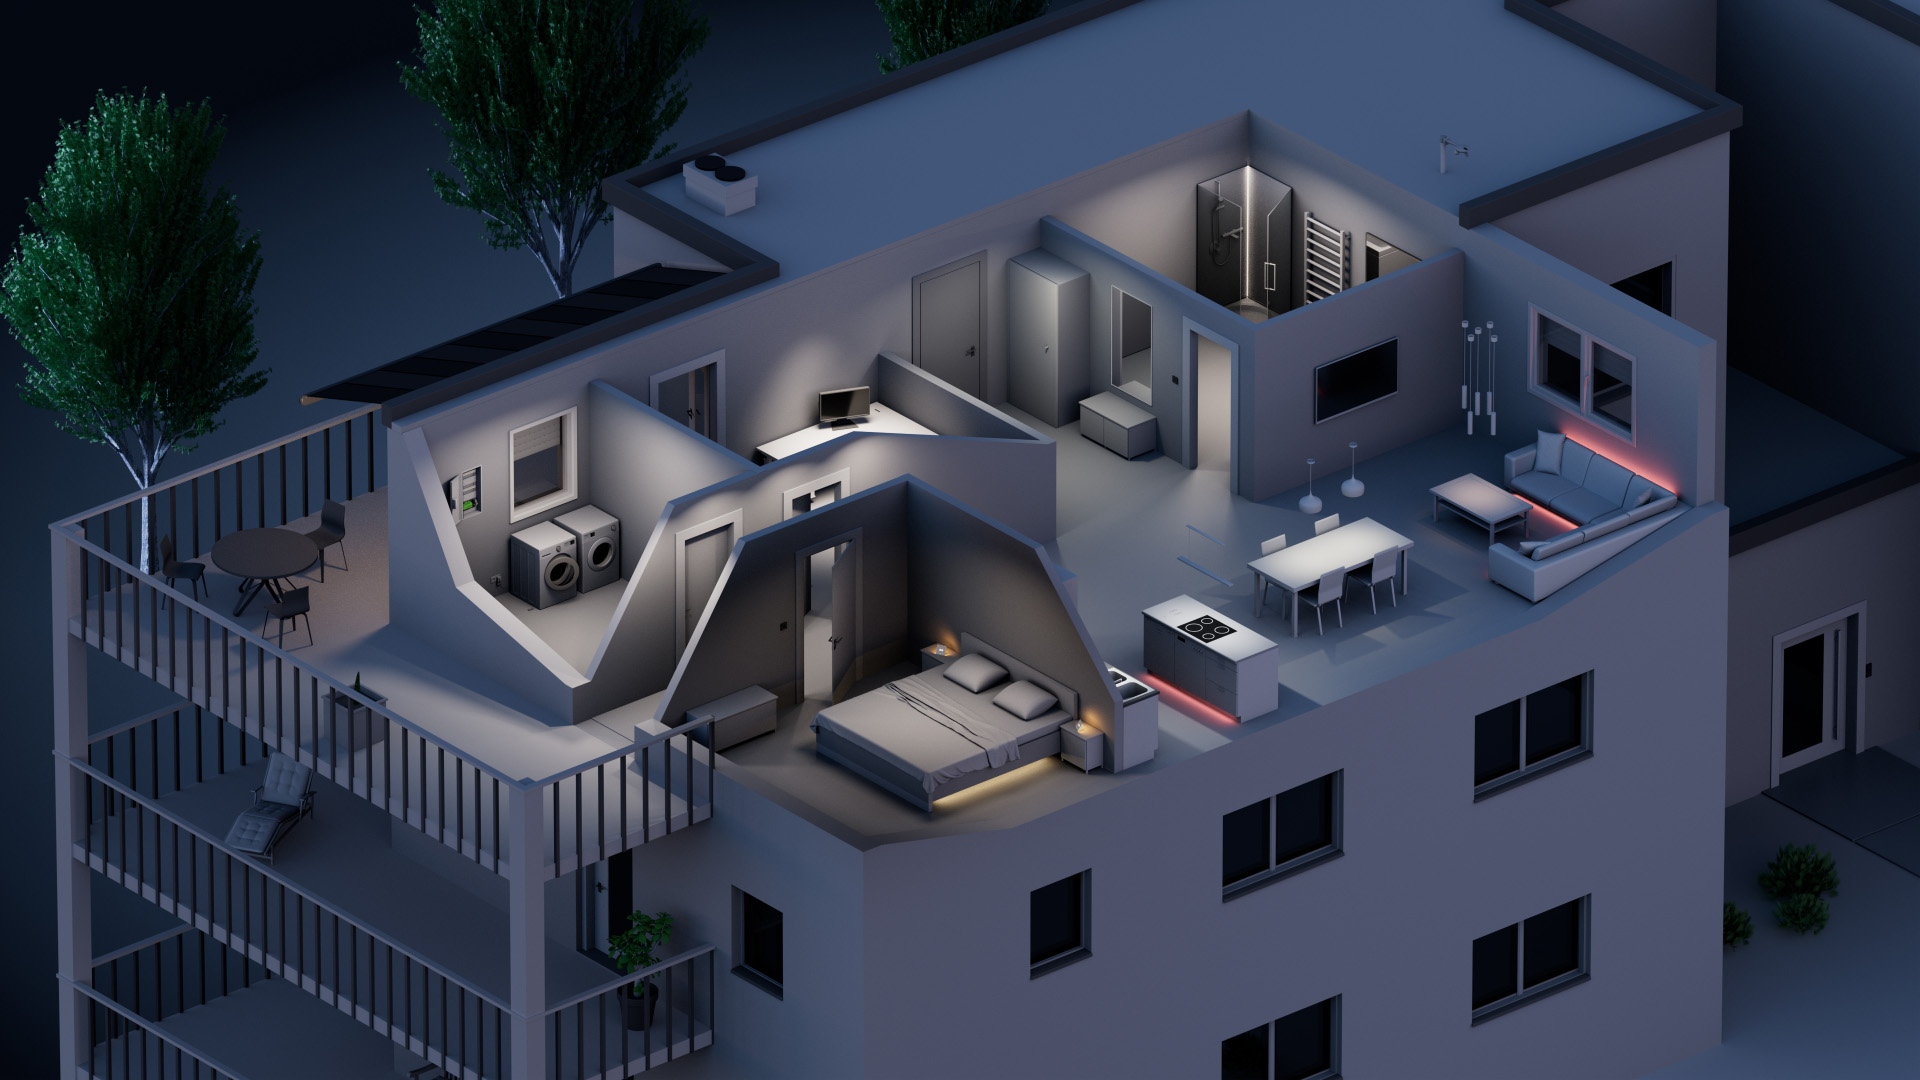 Different lighting moods and other smart MDU solutions depicted within an apartment